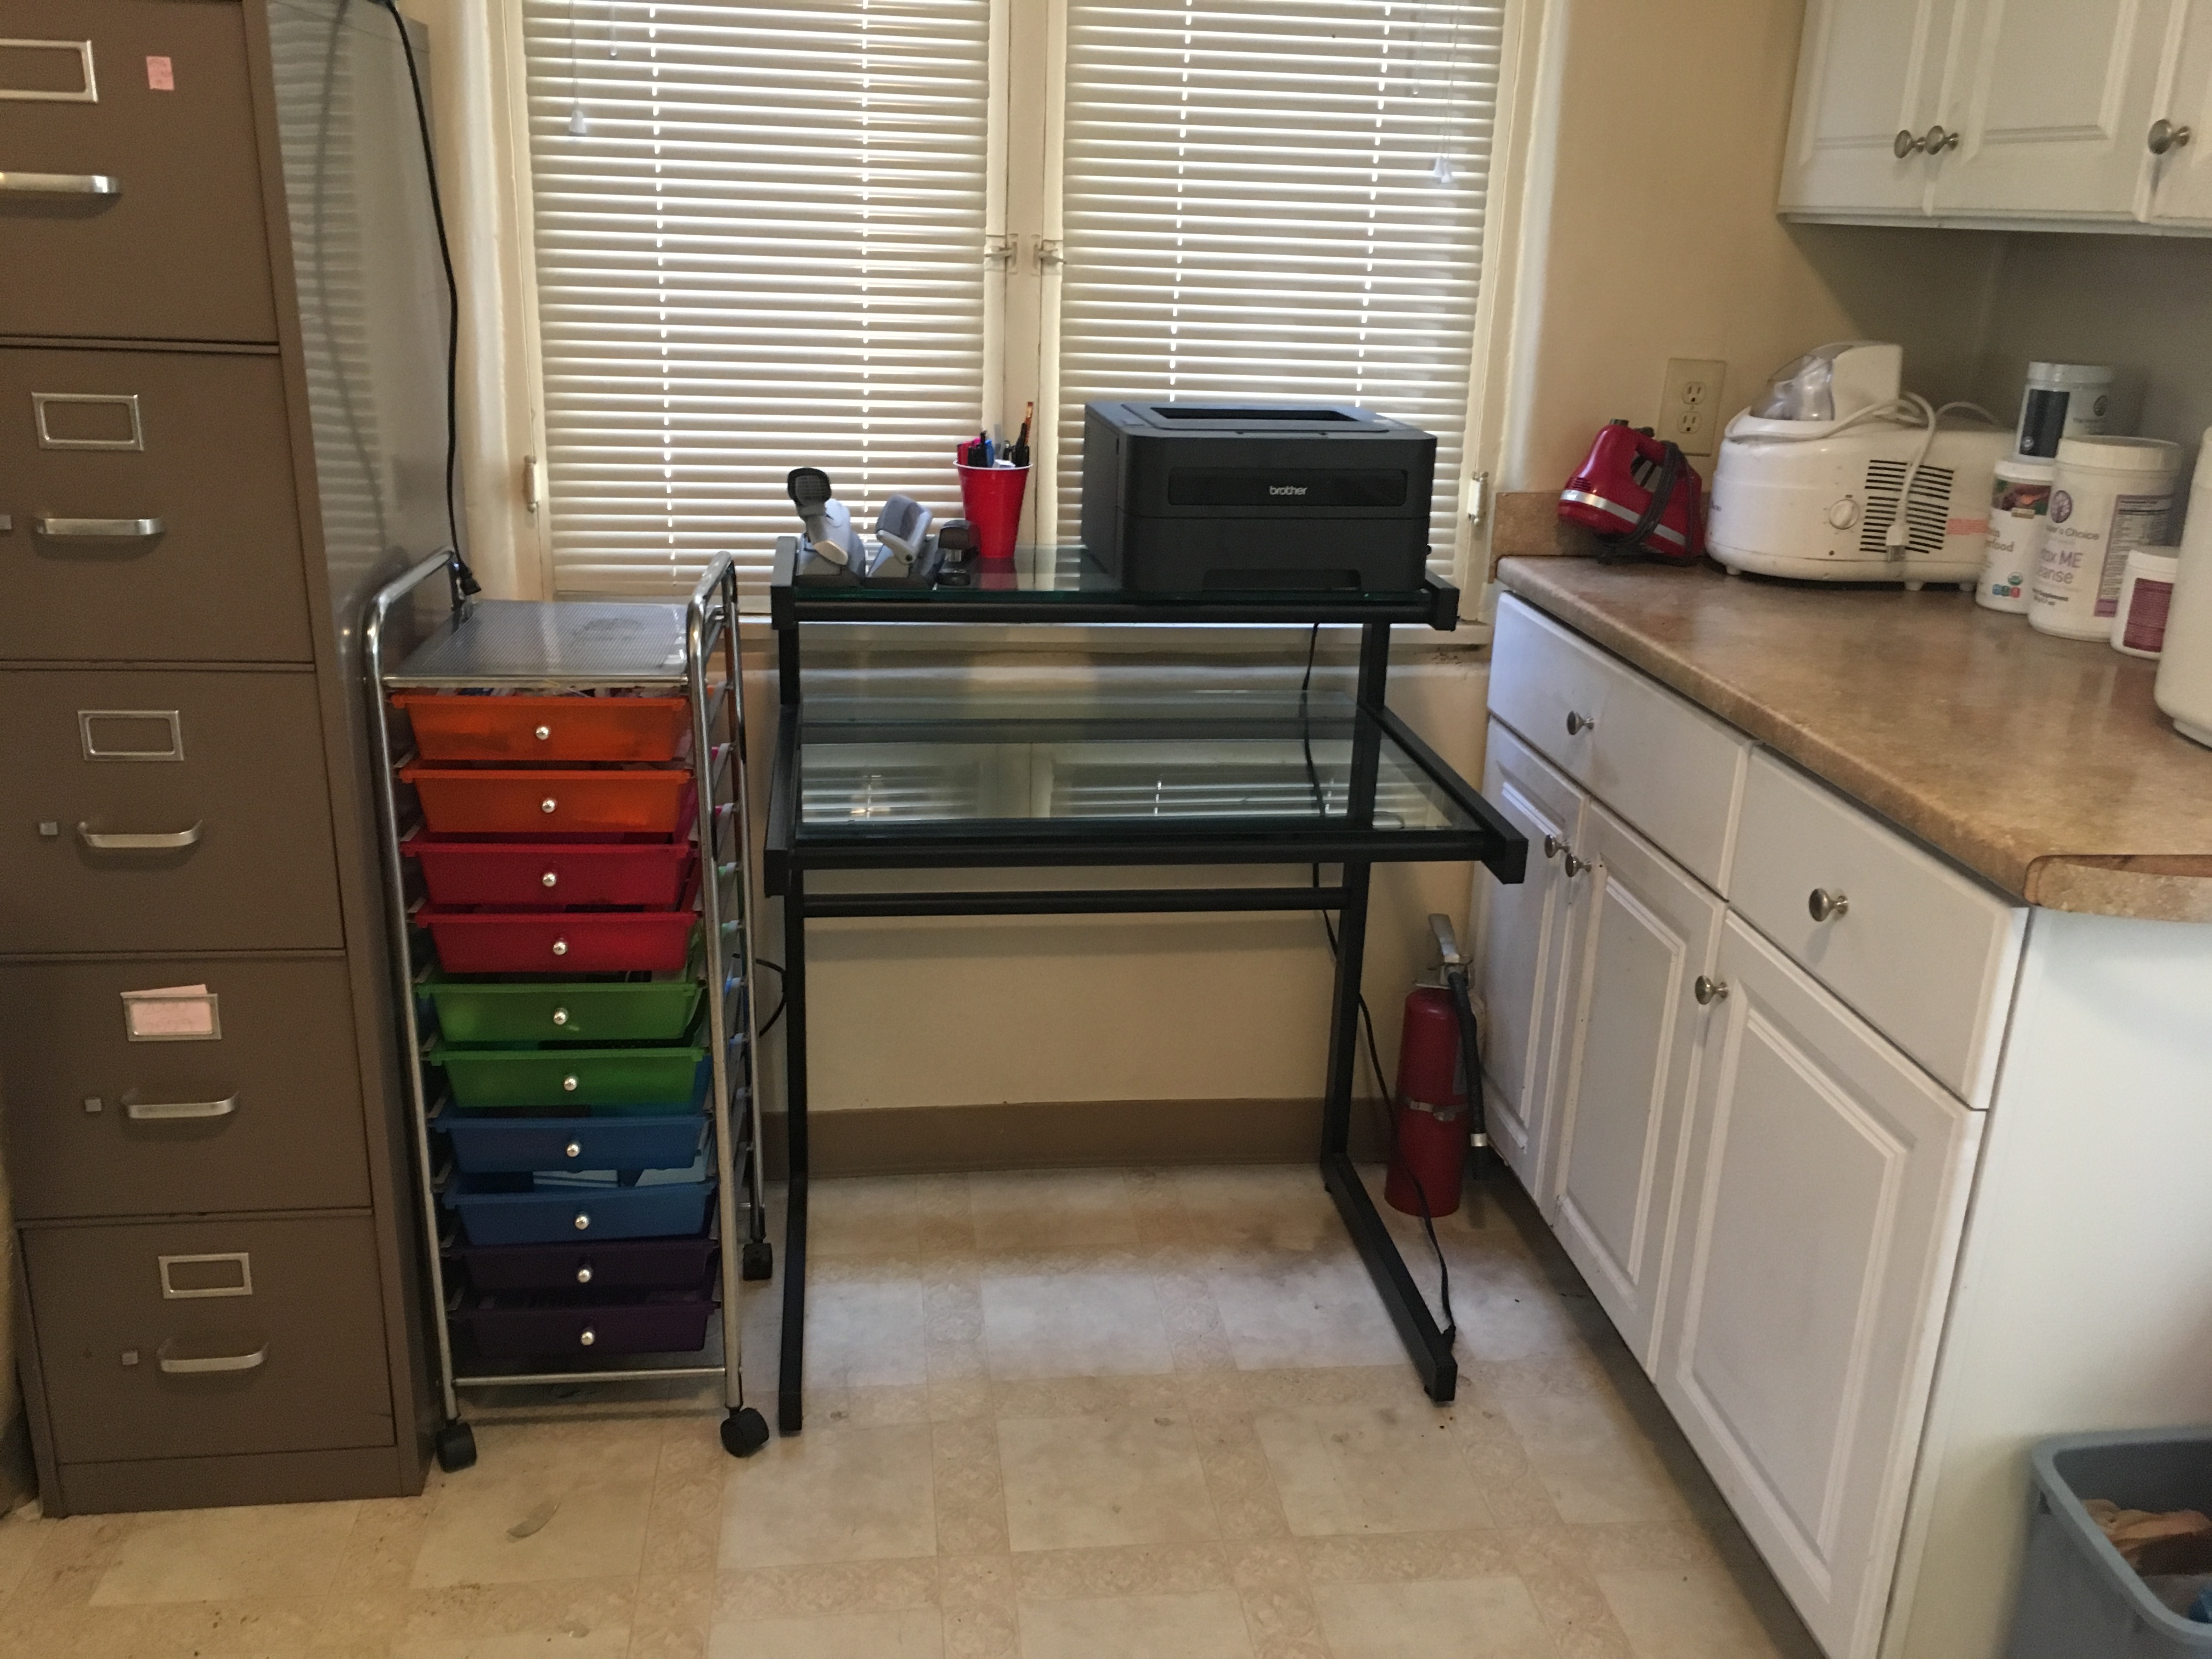 Work Samples - Hope Organizers, Inc. by Professional Organizer Janet Fishman, also known as the paper organizers, serves Los Angeles, Ventura, Santa Barbara, and Orange County, California. We offer paper management, daily money management, senior services, plus organizing and clutter management! https://hopeorganizers.com